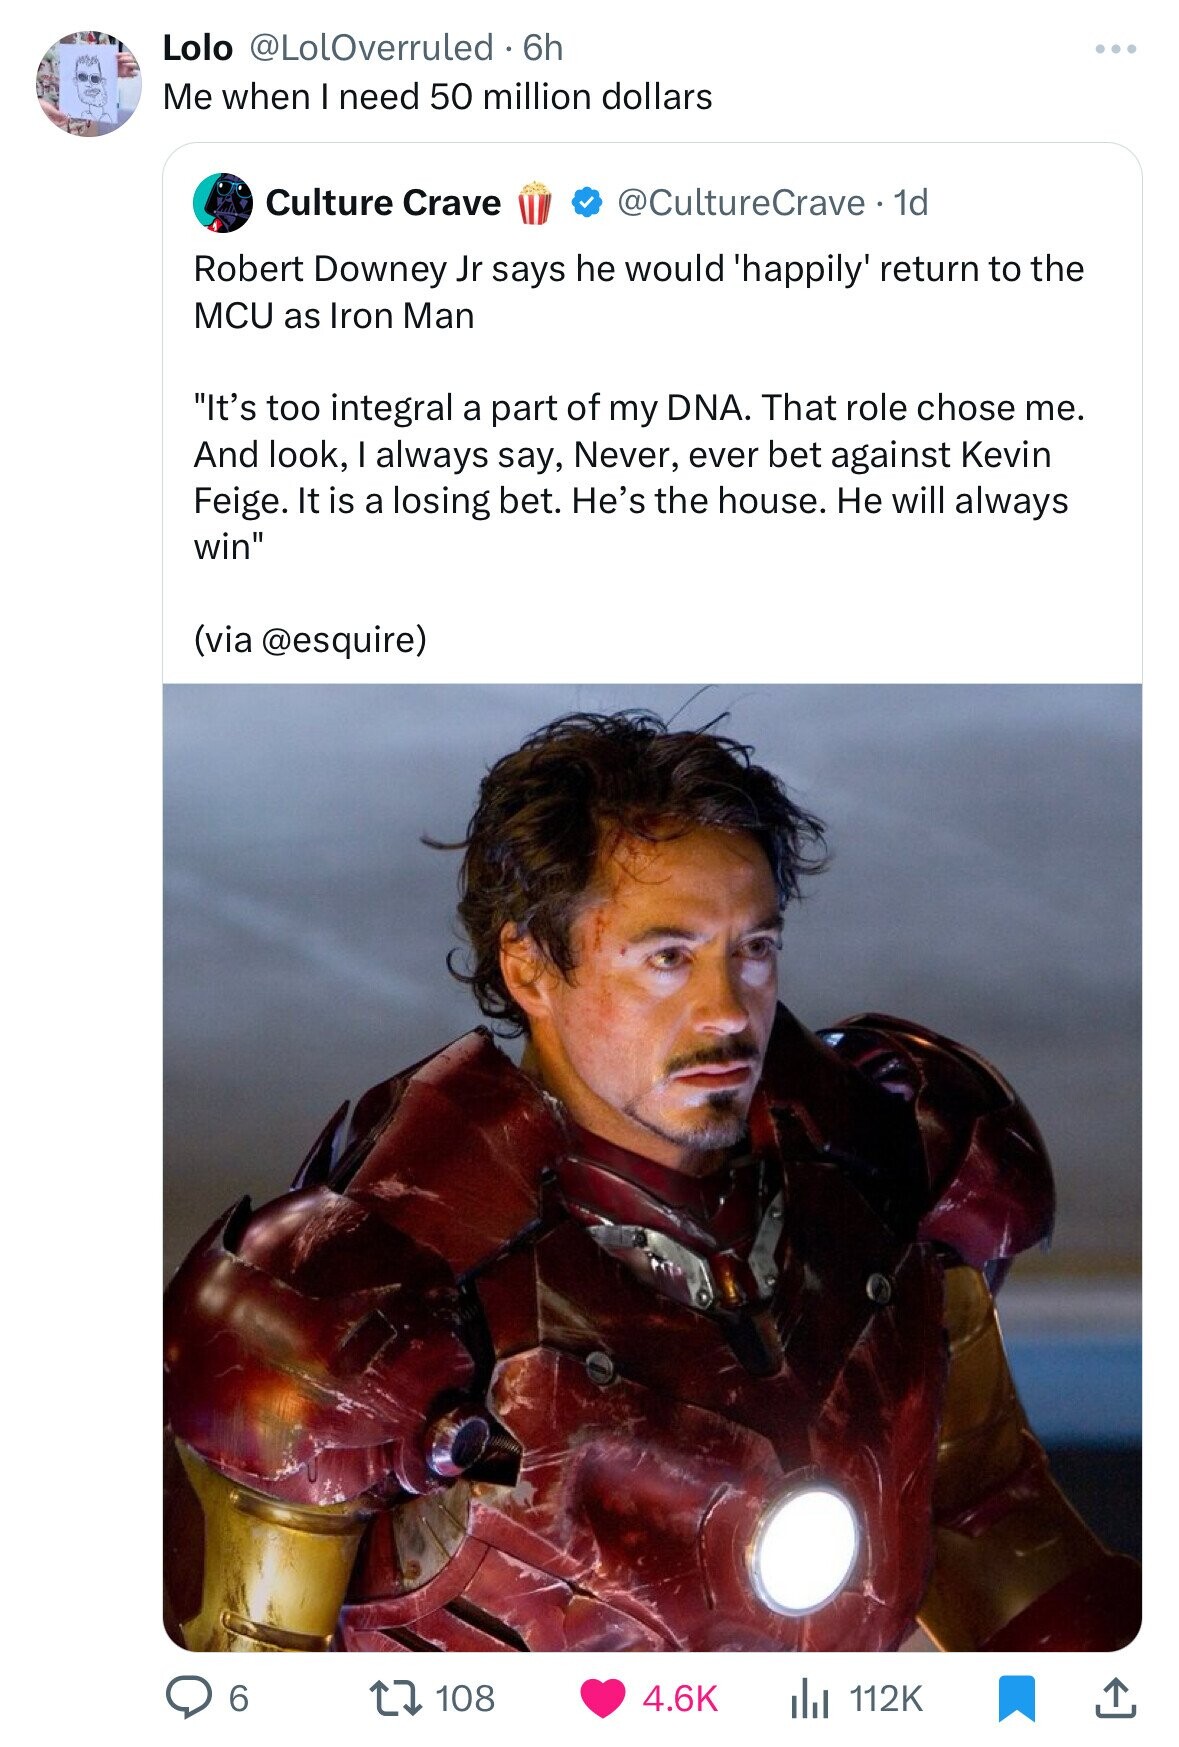 iron man robert downey jr - Lolo 6h Me when I need 50 million dollars Culture Crave 1d . Robert Downey Jr says he would 'happily' return to the Mcu as Iron Man "It's too integral a part of my Dna. That role chose me. And look, I always say, Never, ever be